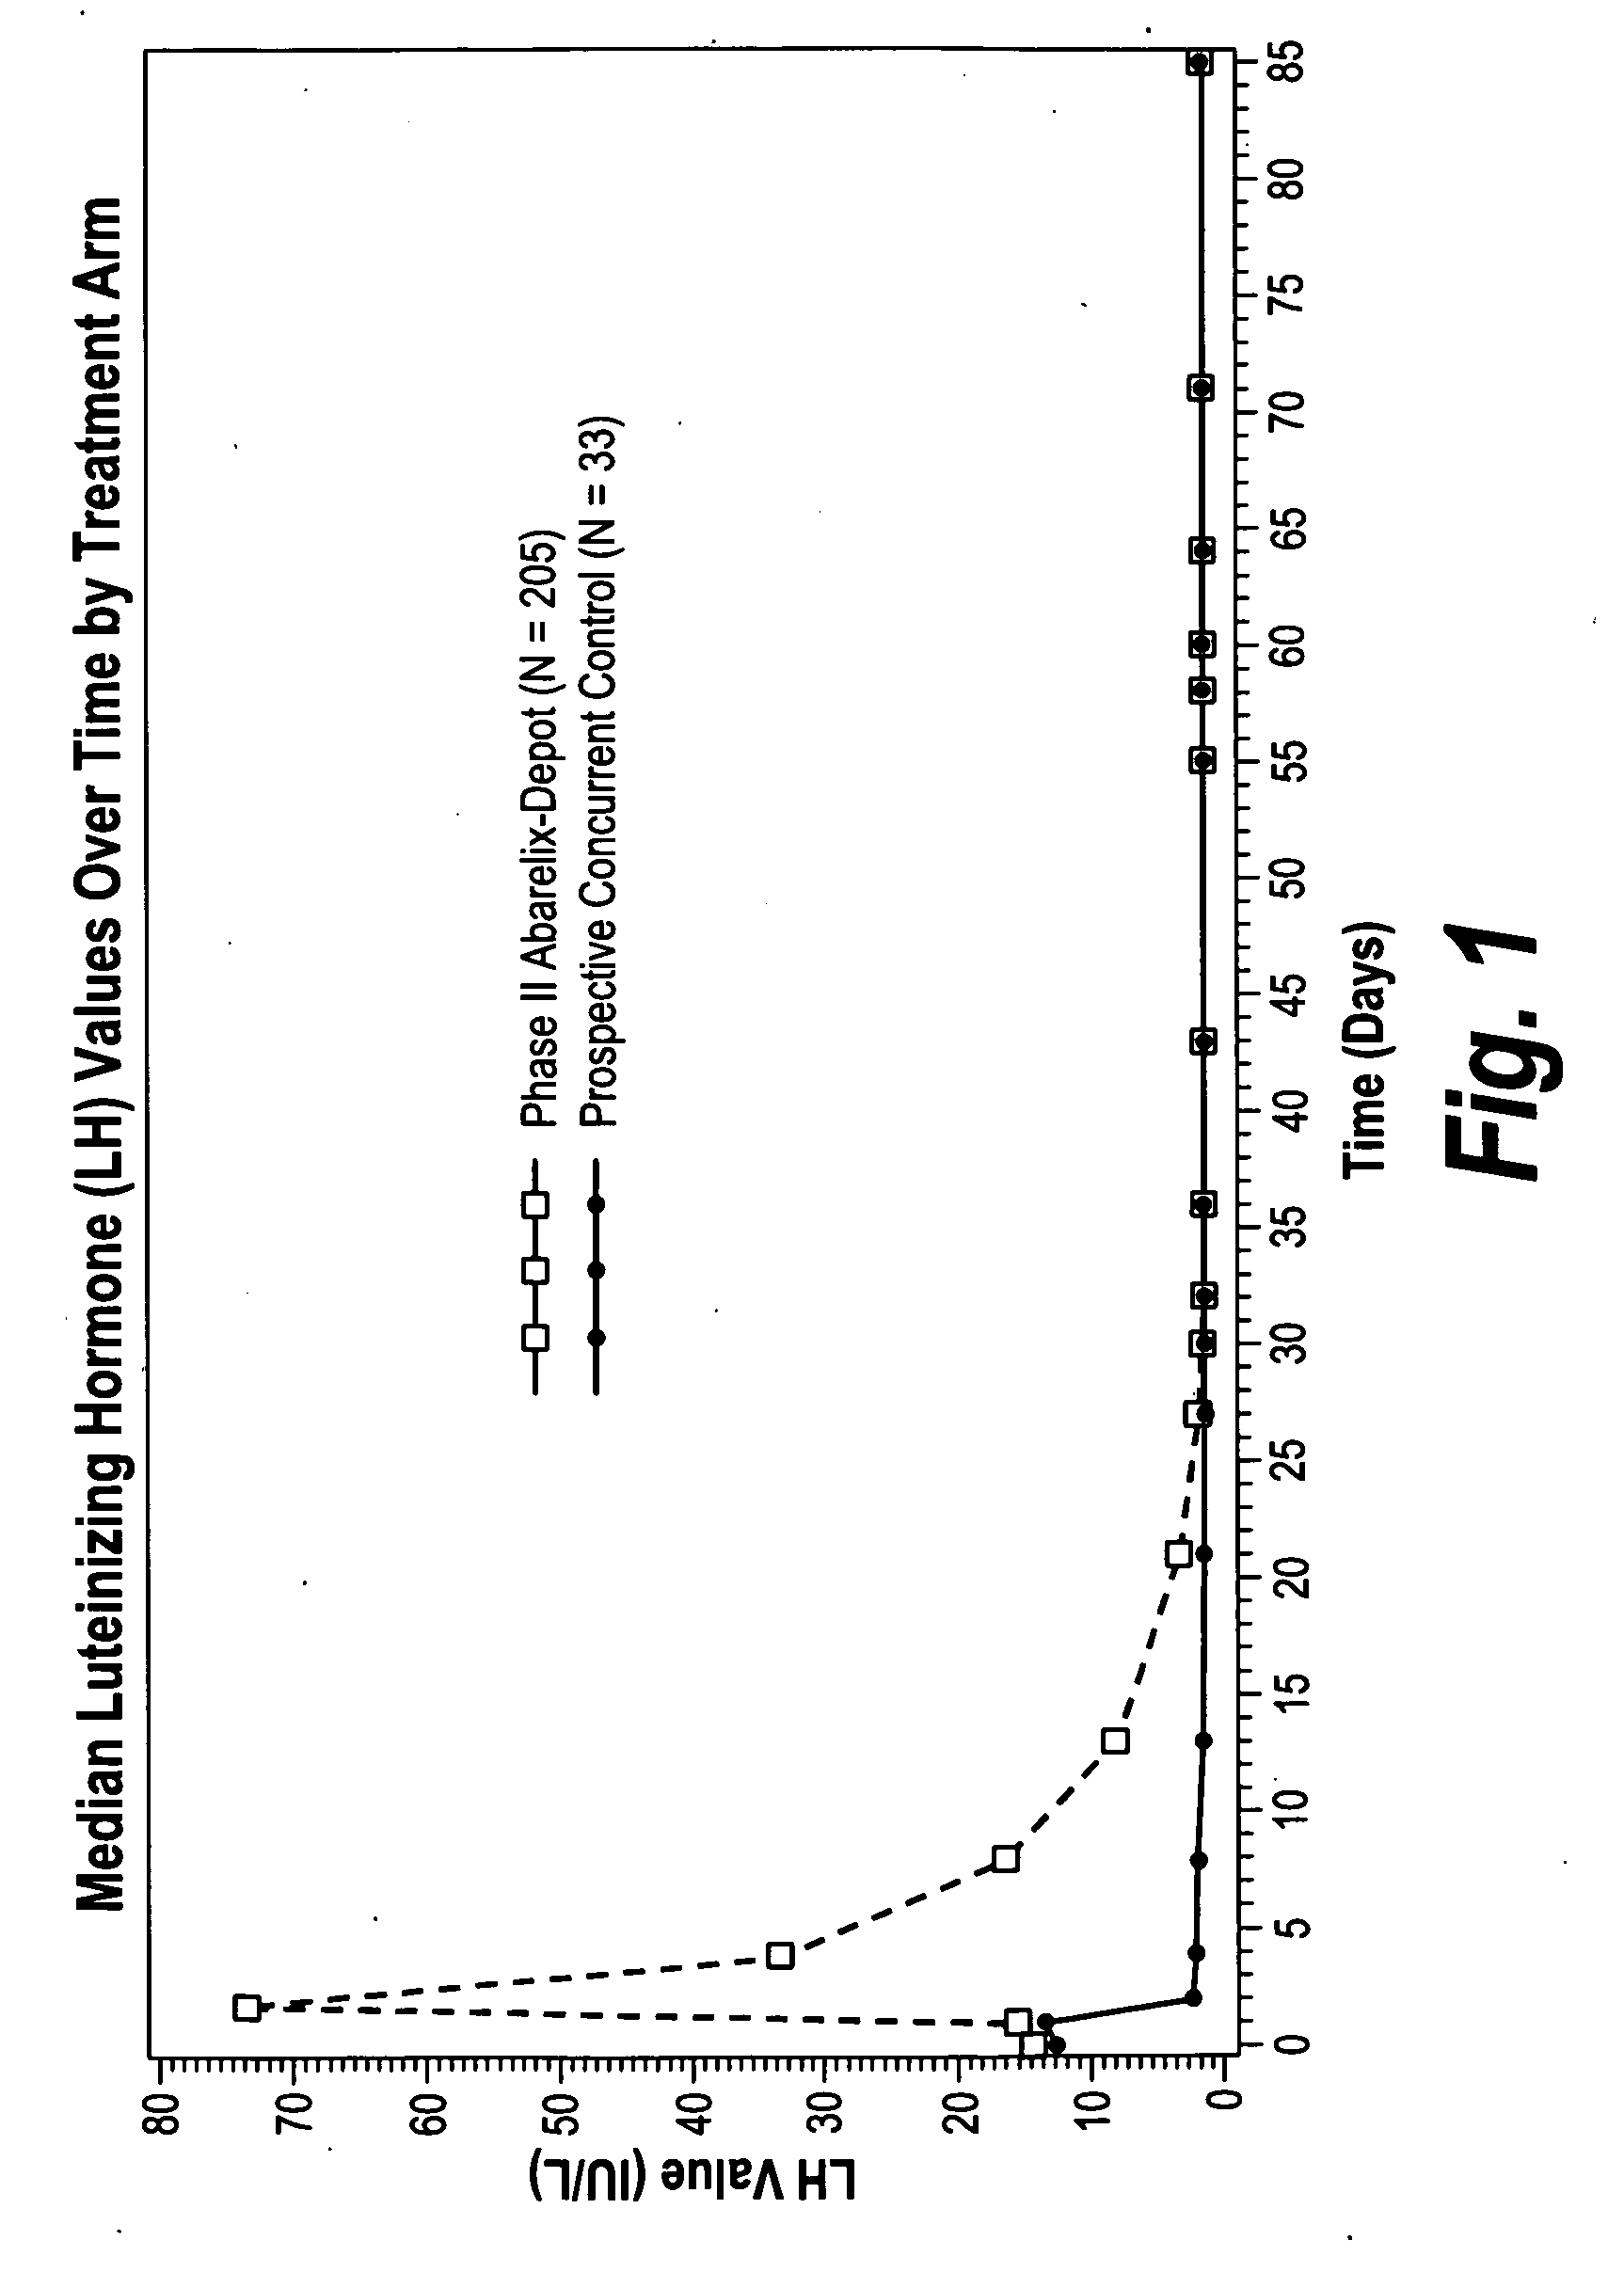 Methods for treating FSH related conditions with GnRH antagonists